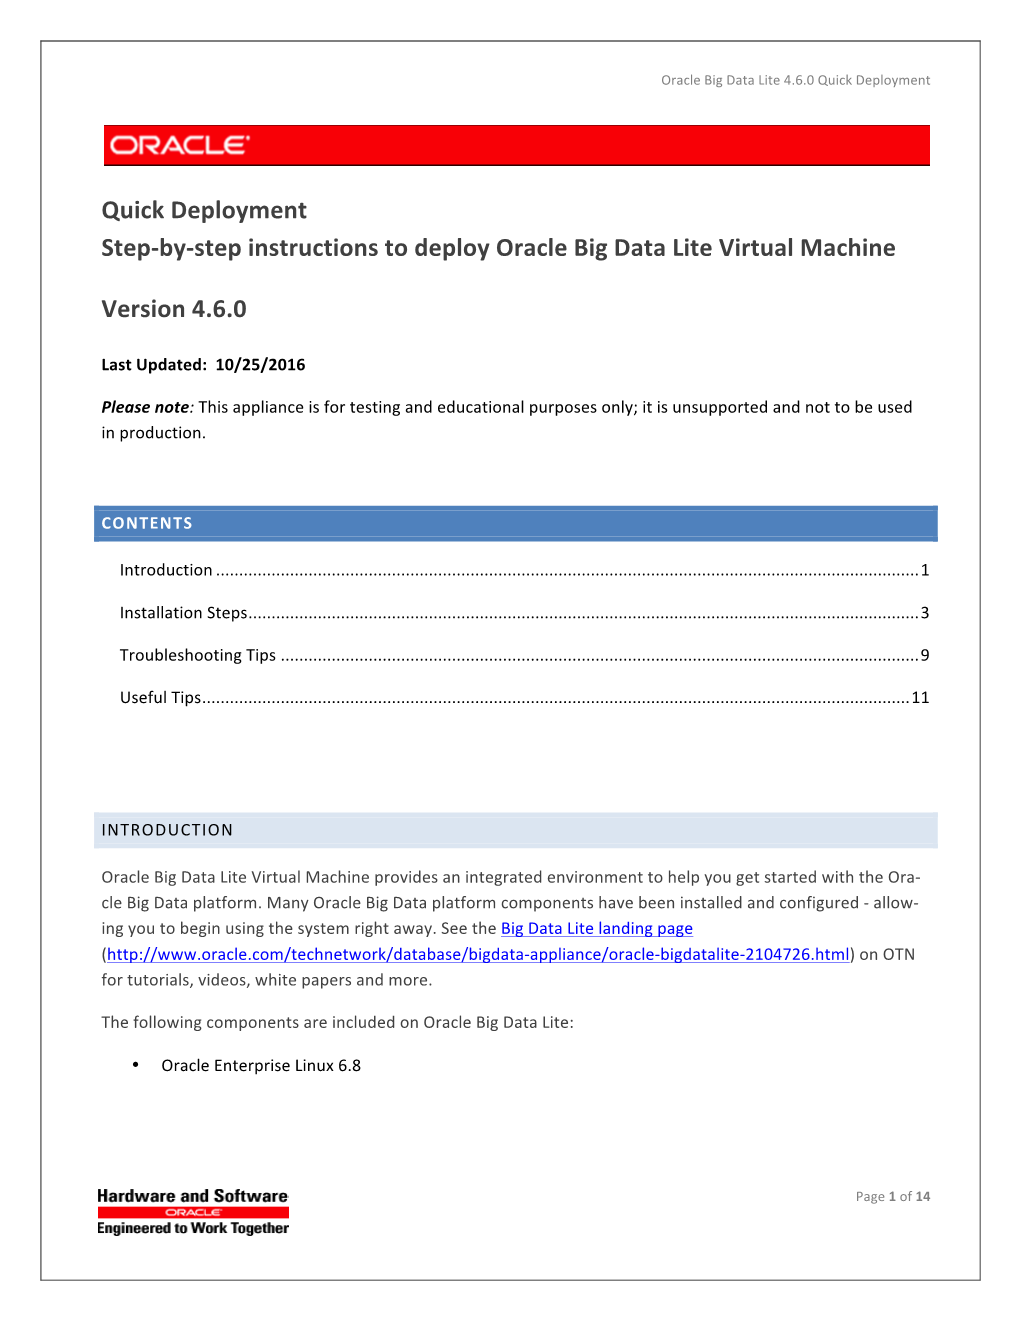 By-‐Step Instructions to Deploy Oracle Big Data Lite